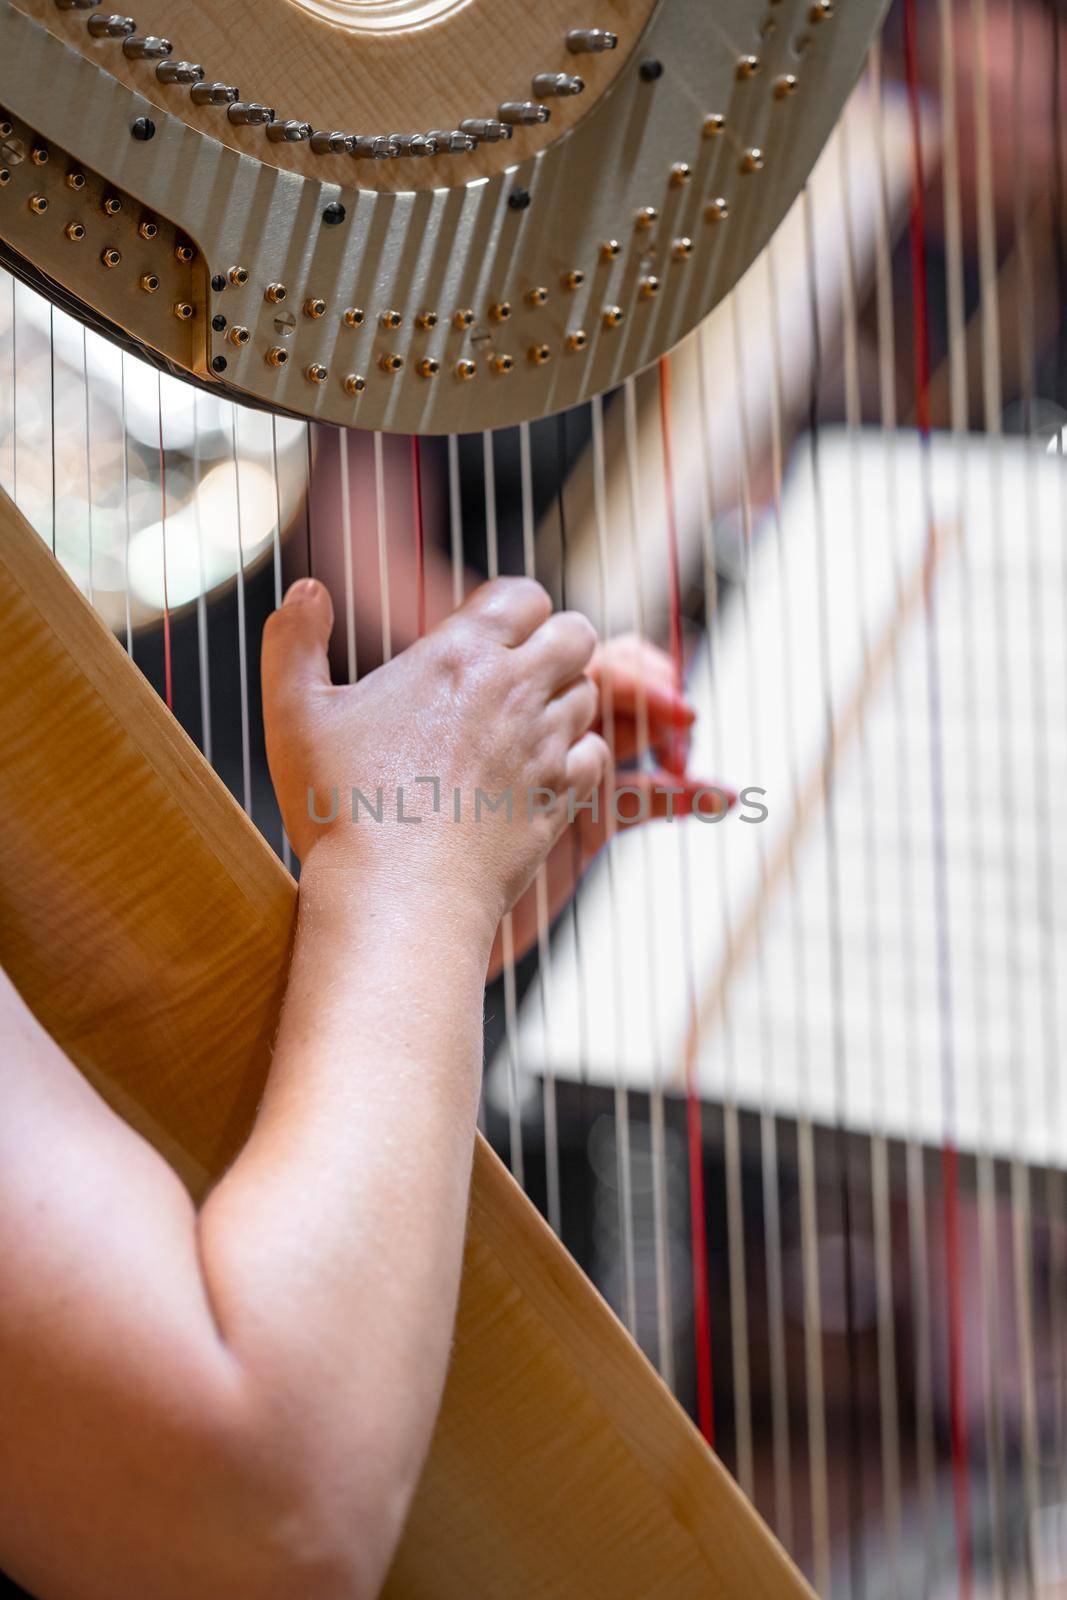 harp on symphony orchestra stage, detail of hands with strings.